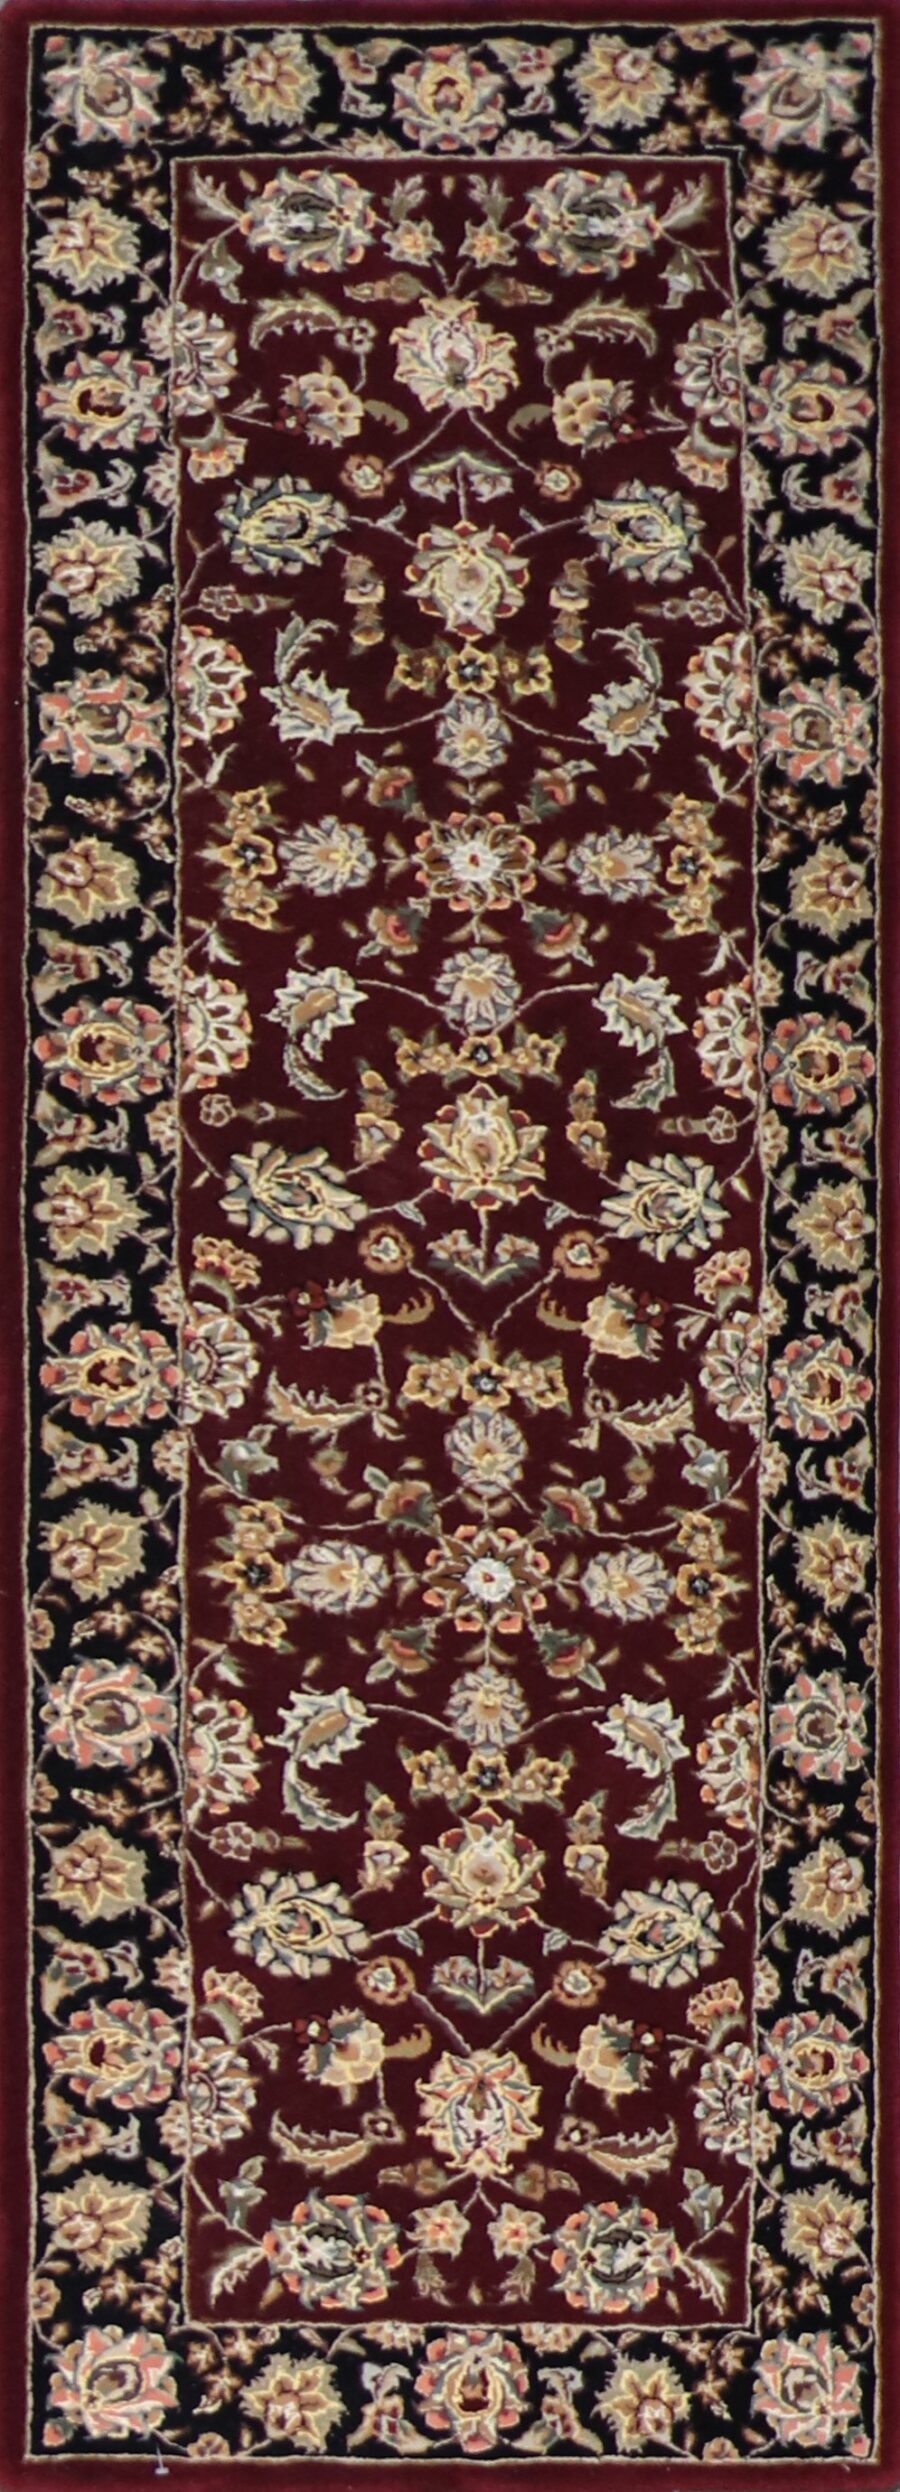 2'8"x8'1" Decorative Burgundy Wool & Silk Hand-Tufted Rug - Direct Rug Import | Rugs in Chicago, Indiana,South Bend,Granger